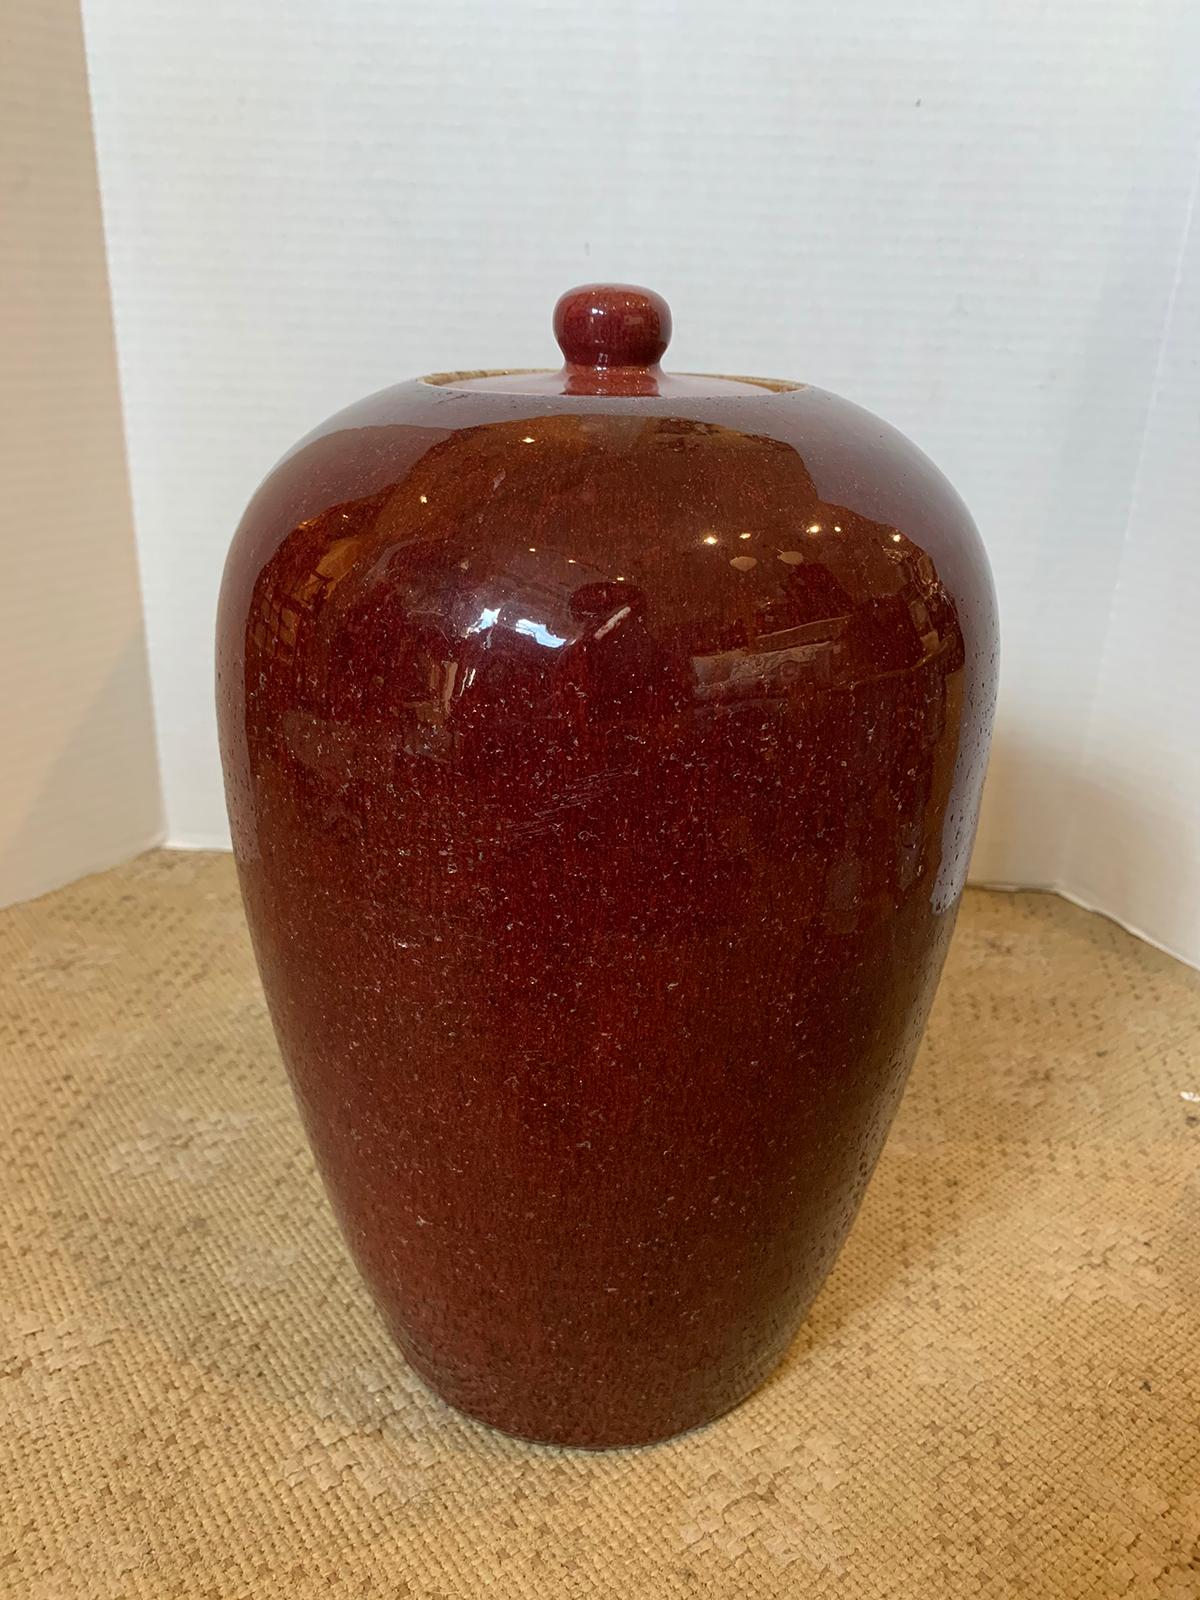 19th-20th century Chinese Sang de Boeuf ox blood red flambe glazed porcelain lidded vase, unmarked.